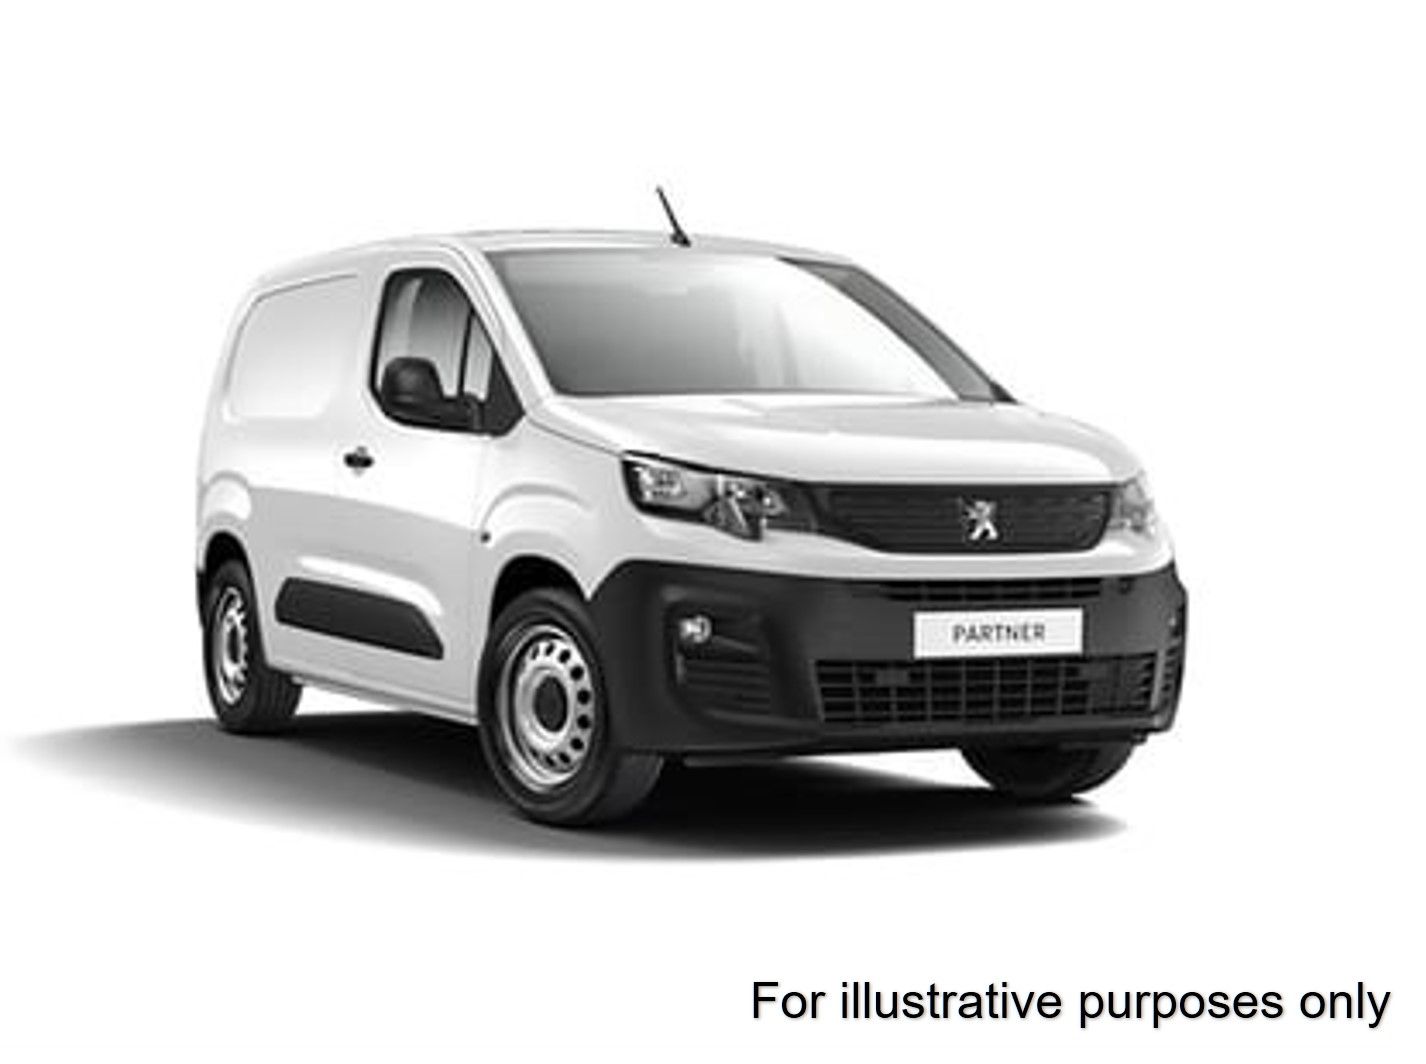 2018 Peugeot Partner 850 1.6 Bluehdi 100 Professional Van [Non Ss]*Limited to 70mph* (NV18OPE) Image 1